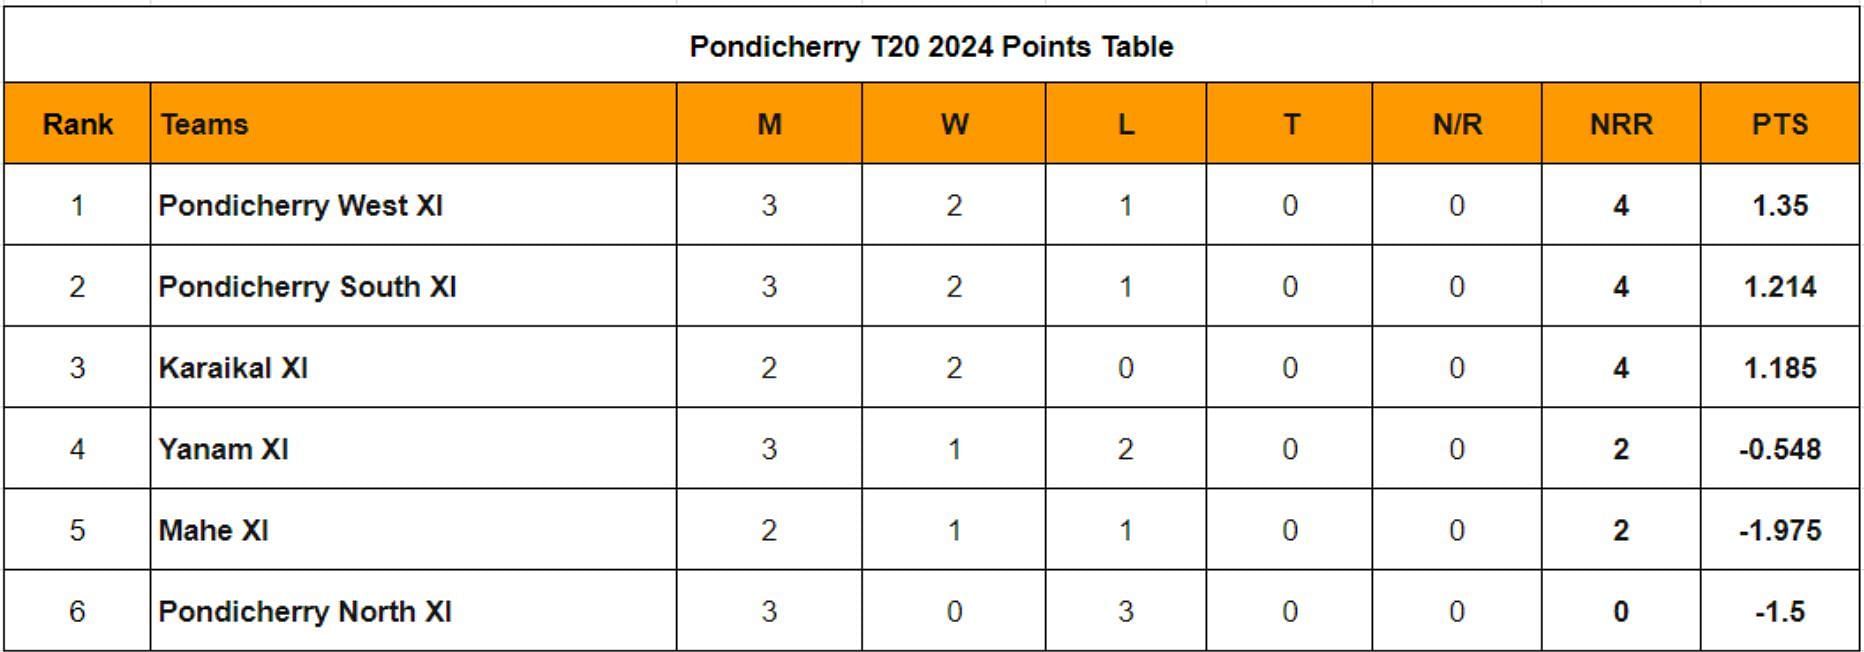 Pondicherry T20 2024 Points Table Updated standings after Match 8